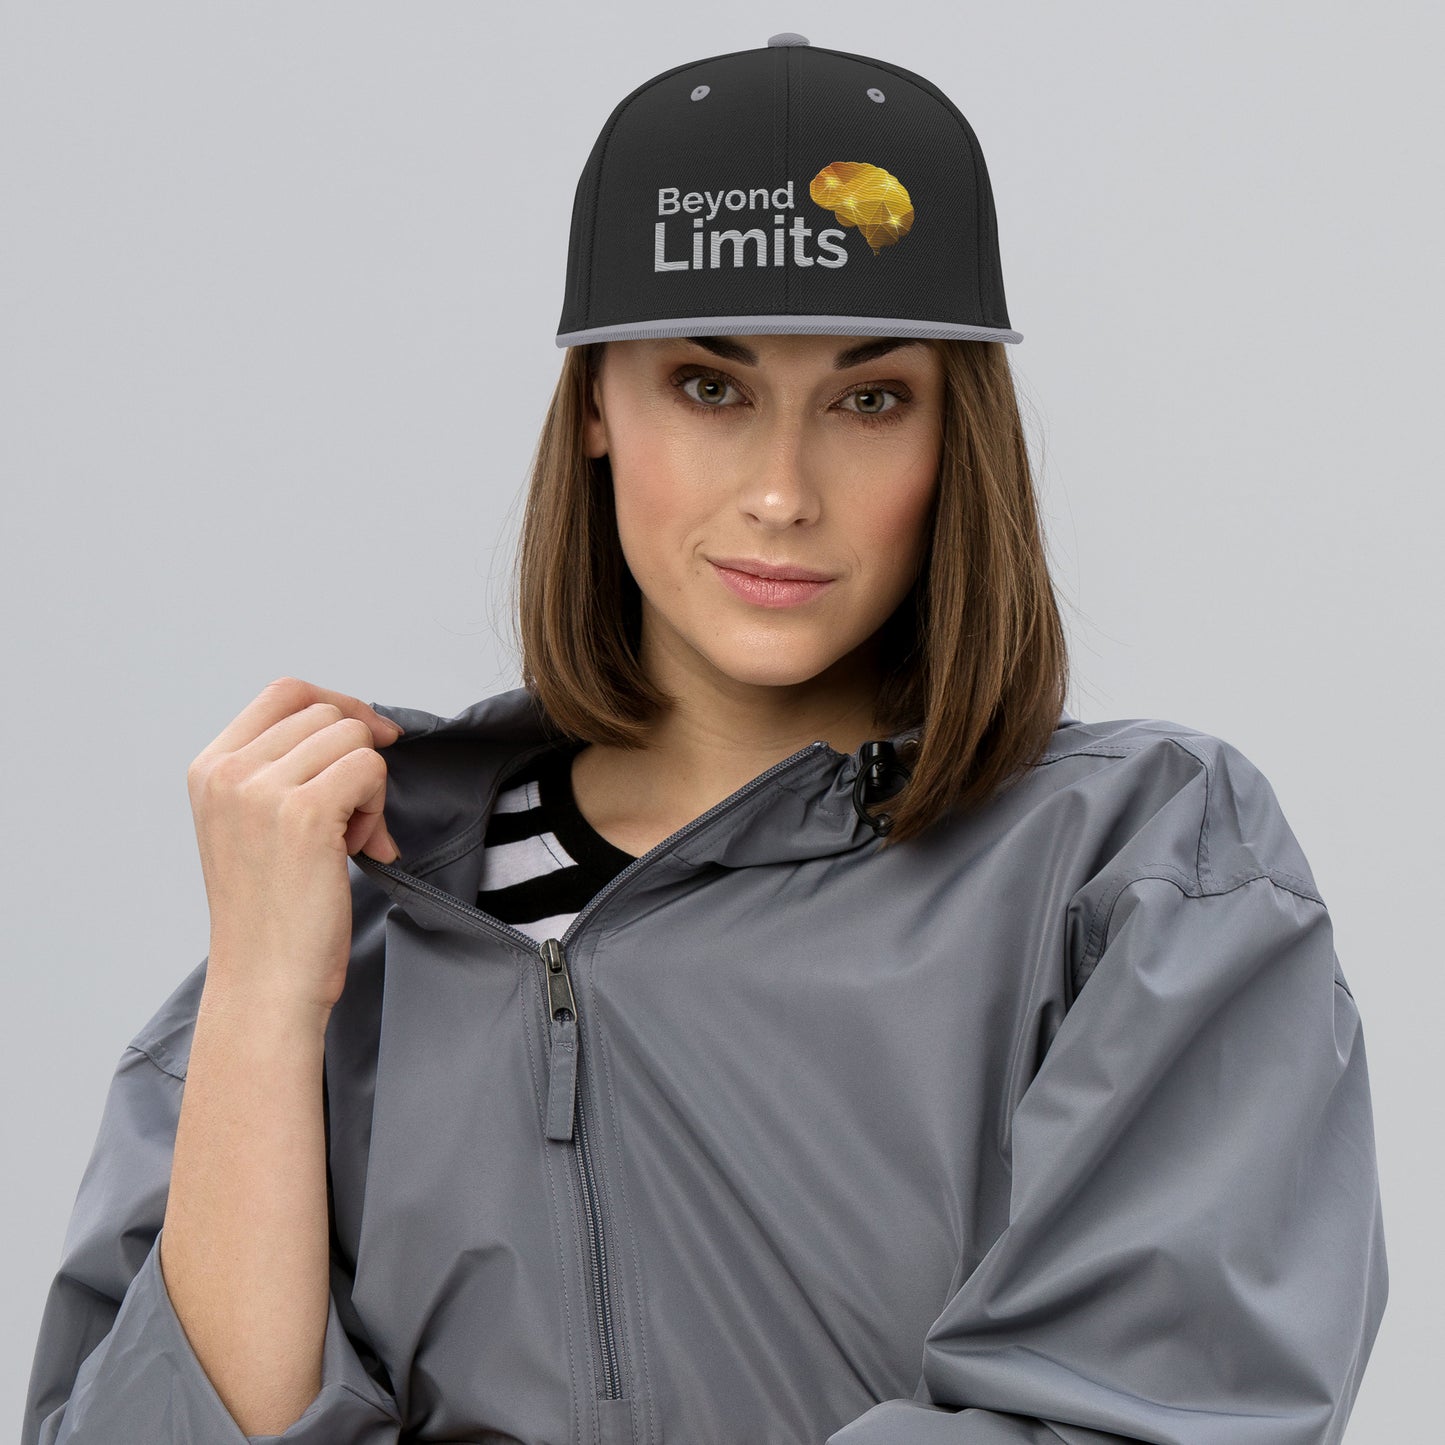 Beyond Limits: Adjustable Snapback Hat with Classic Fit & Flat Brim